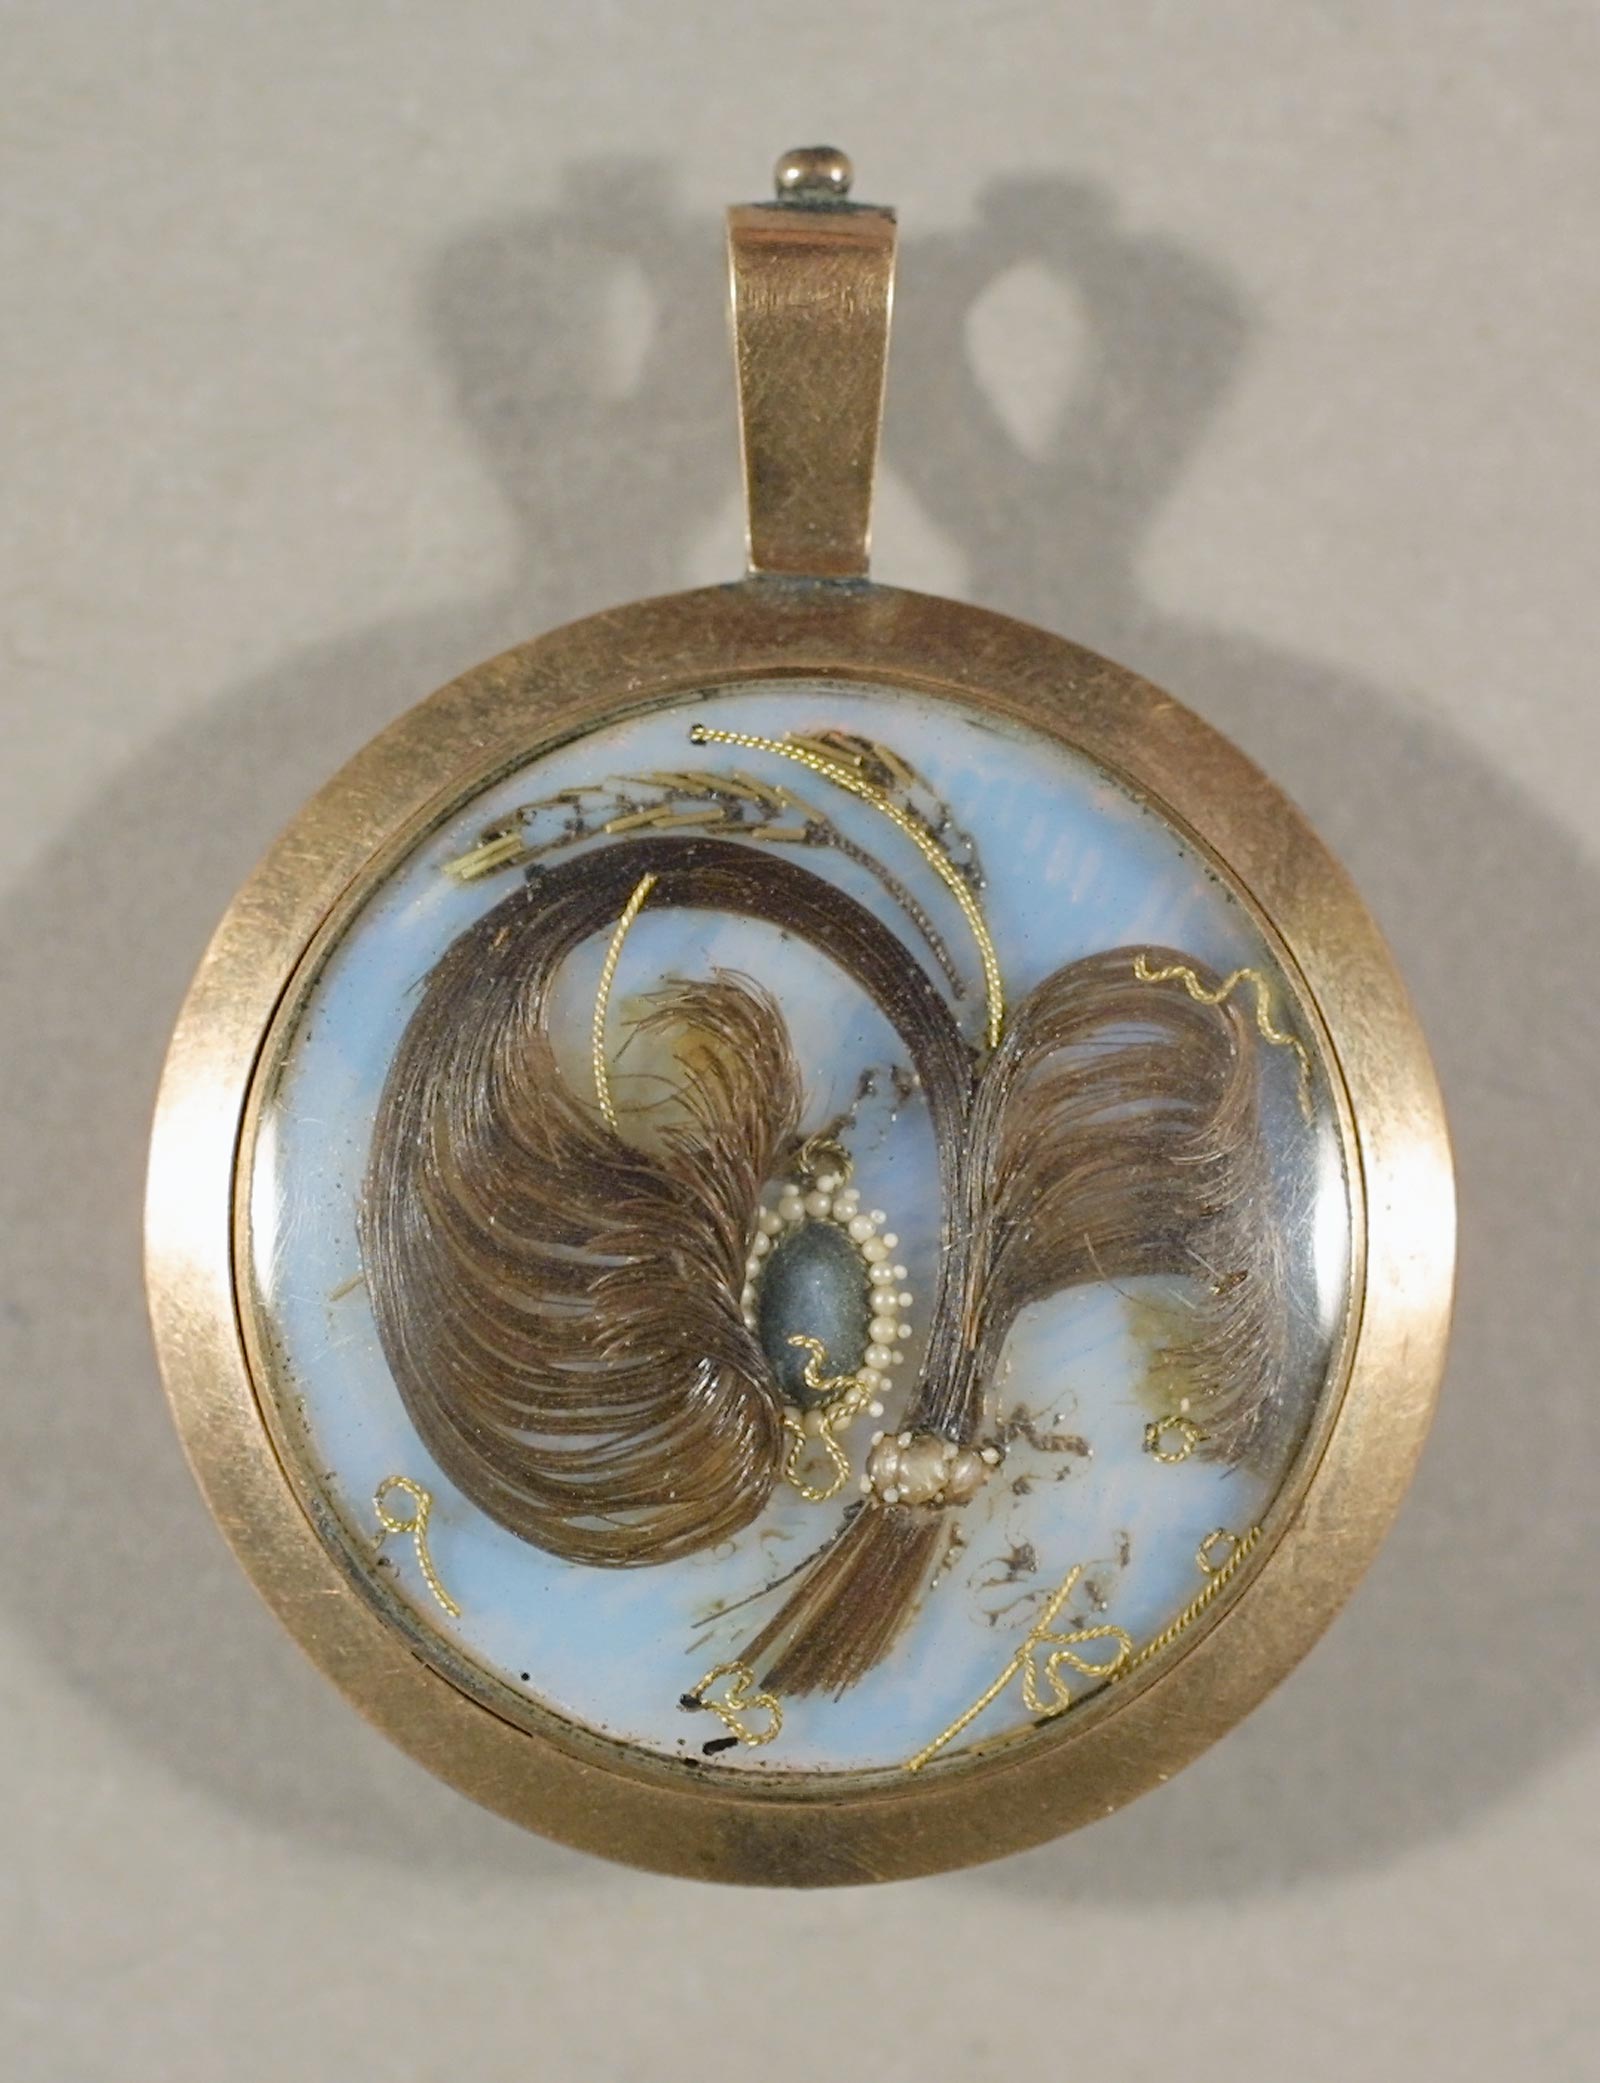 Hairwork locket set with gold initials “JD,” ca. 1800. Gold, glass, human hair, pearls, 1 7⁄16  x 1 1⁄16 x ¼ in. Historic New England, Gift of Mrs. Paul G. Pennoyer, 1965.82.